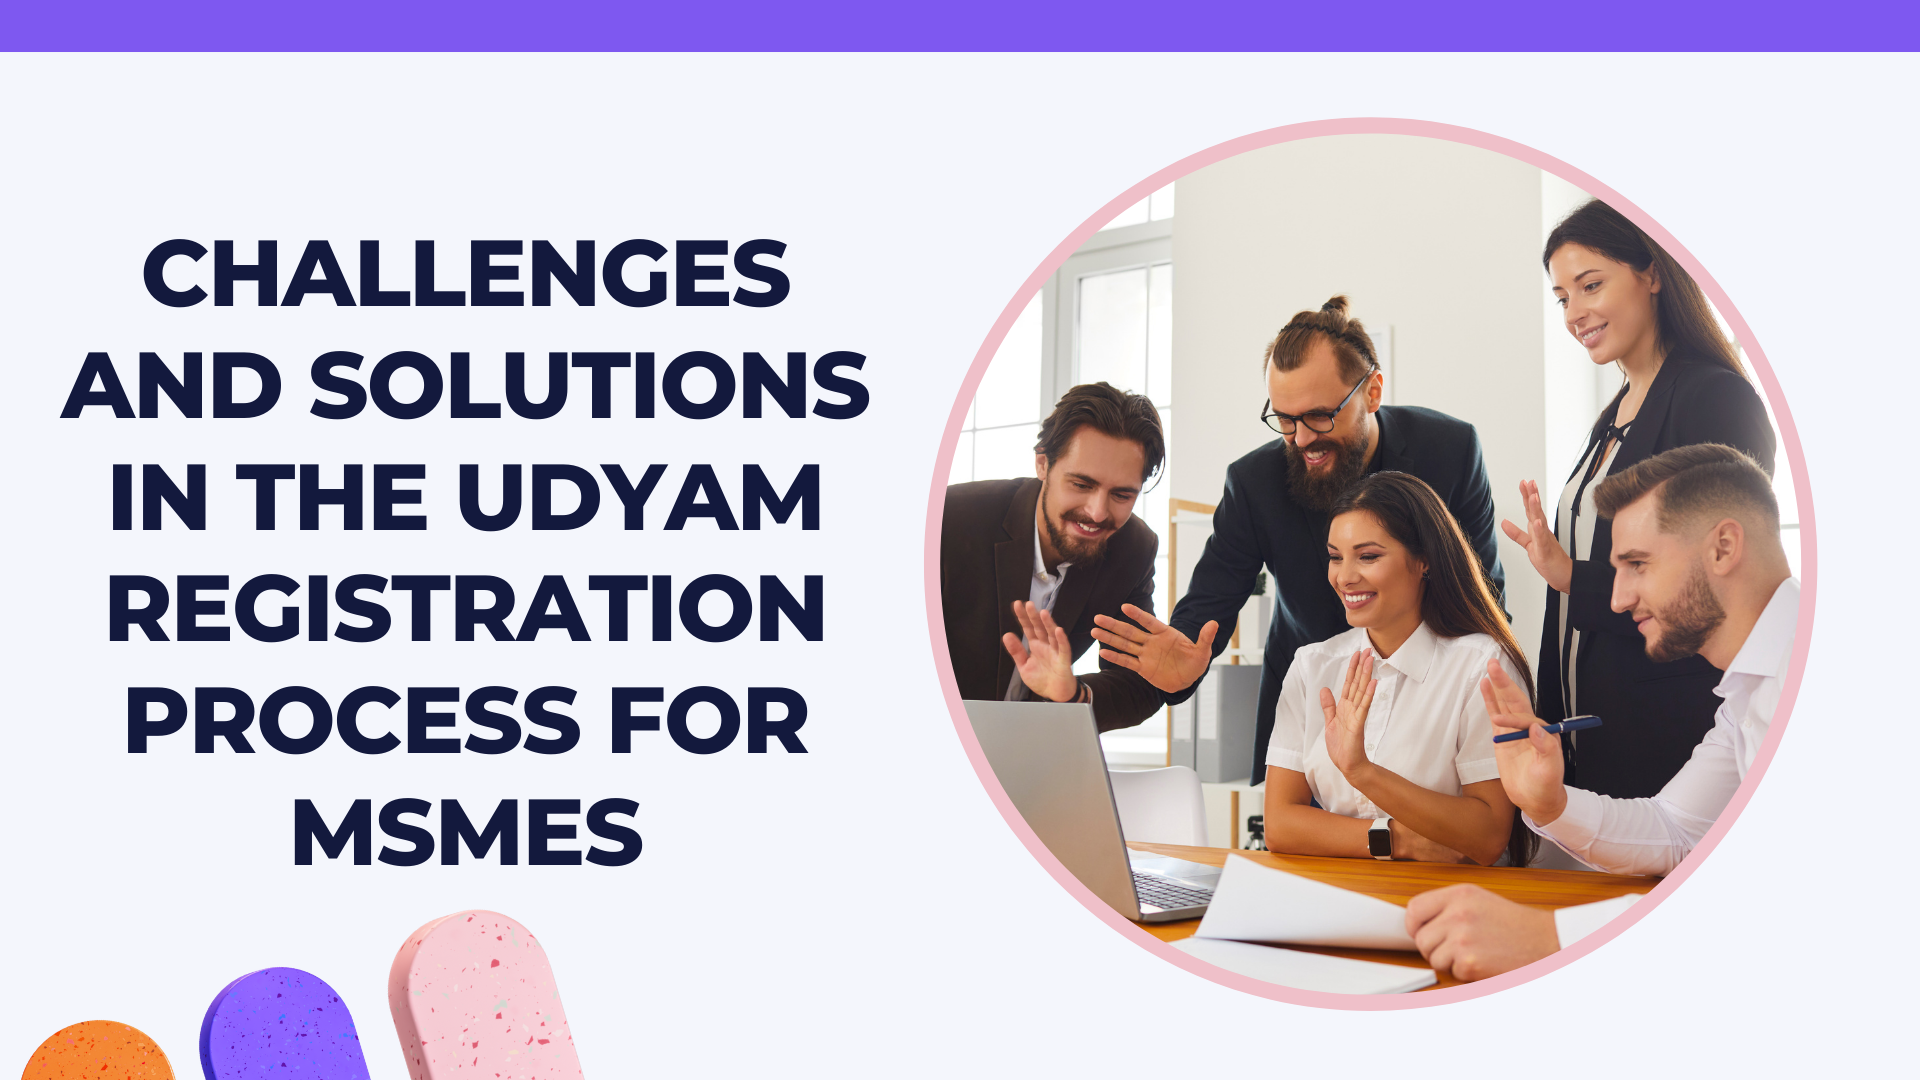 Challenges and Solutions in the Udyam Registration Process for MSMEs